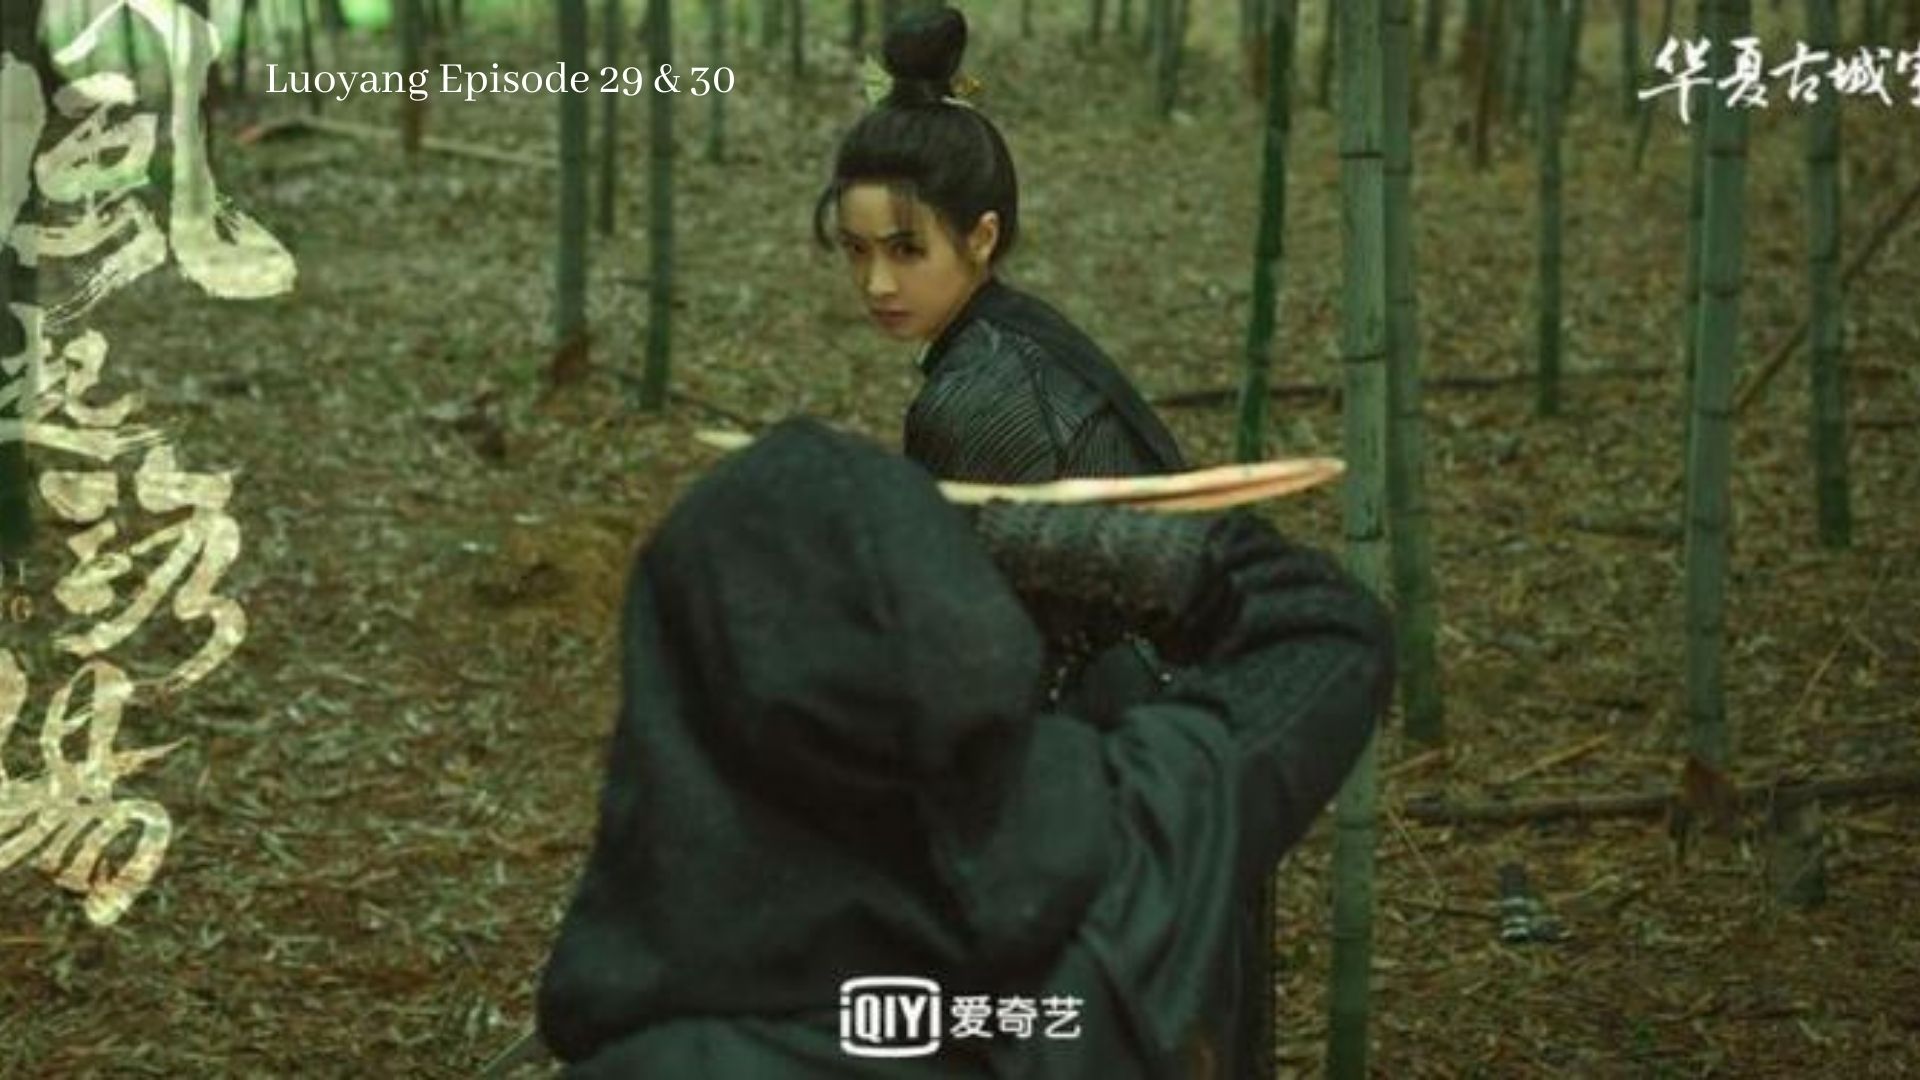 ‘Luoyang Episodes 29 & 30': The Calm Before the Storm